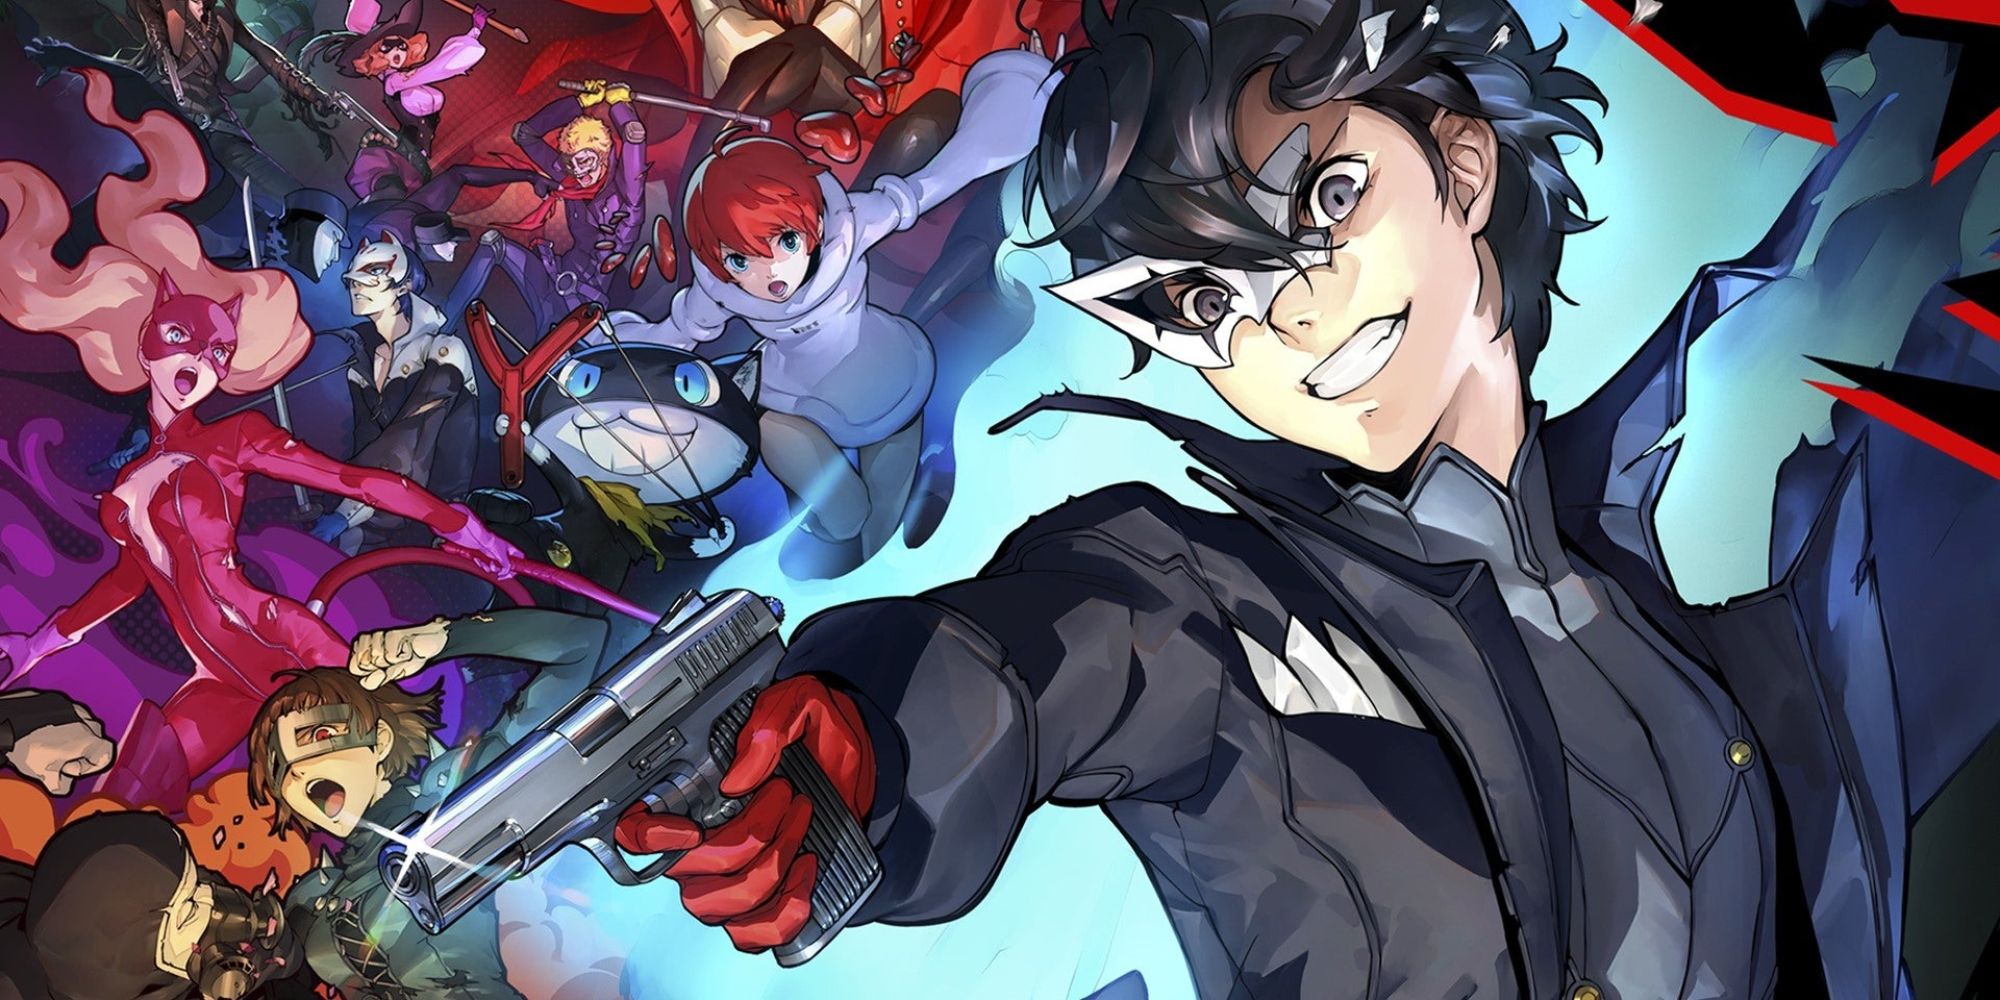 Persona 5: Every Game Ranked, According to Critics